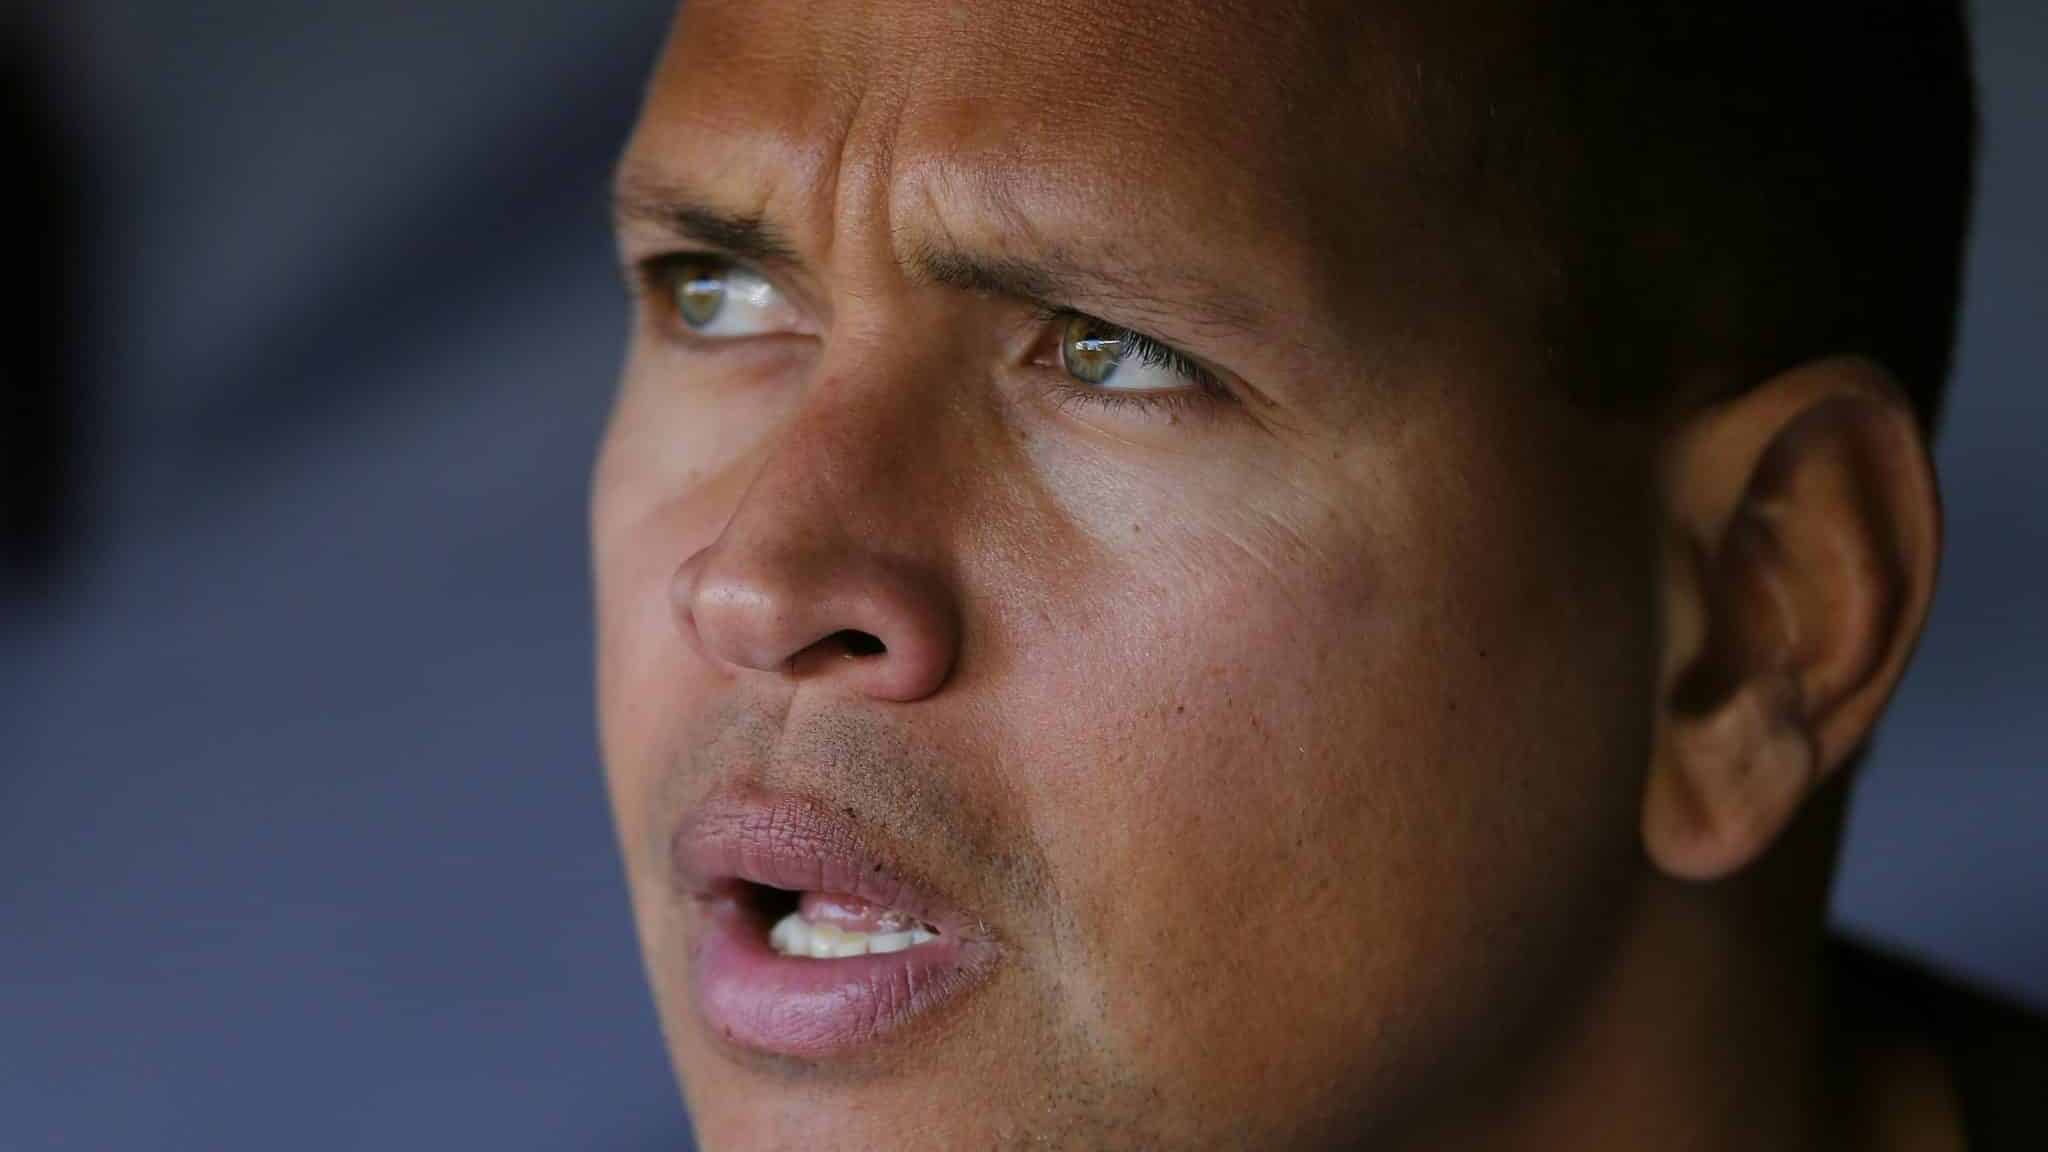 NEW YORK, NY - APRIL 20: Alex Rodriguez #13 of the New York Yankees looks on before a game against the Oakland Athletics at Yankee Stadium on April 20, 2016 in the Bronx borough of New York City. New York Mets